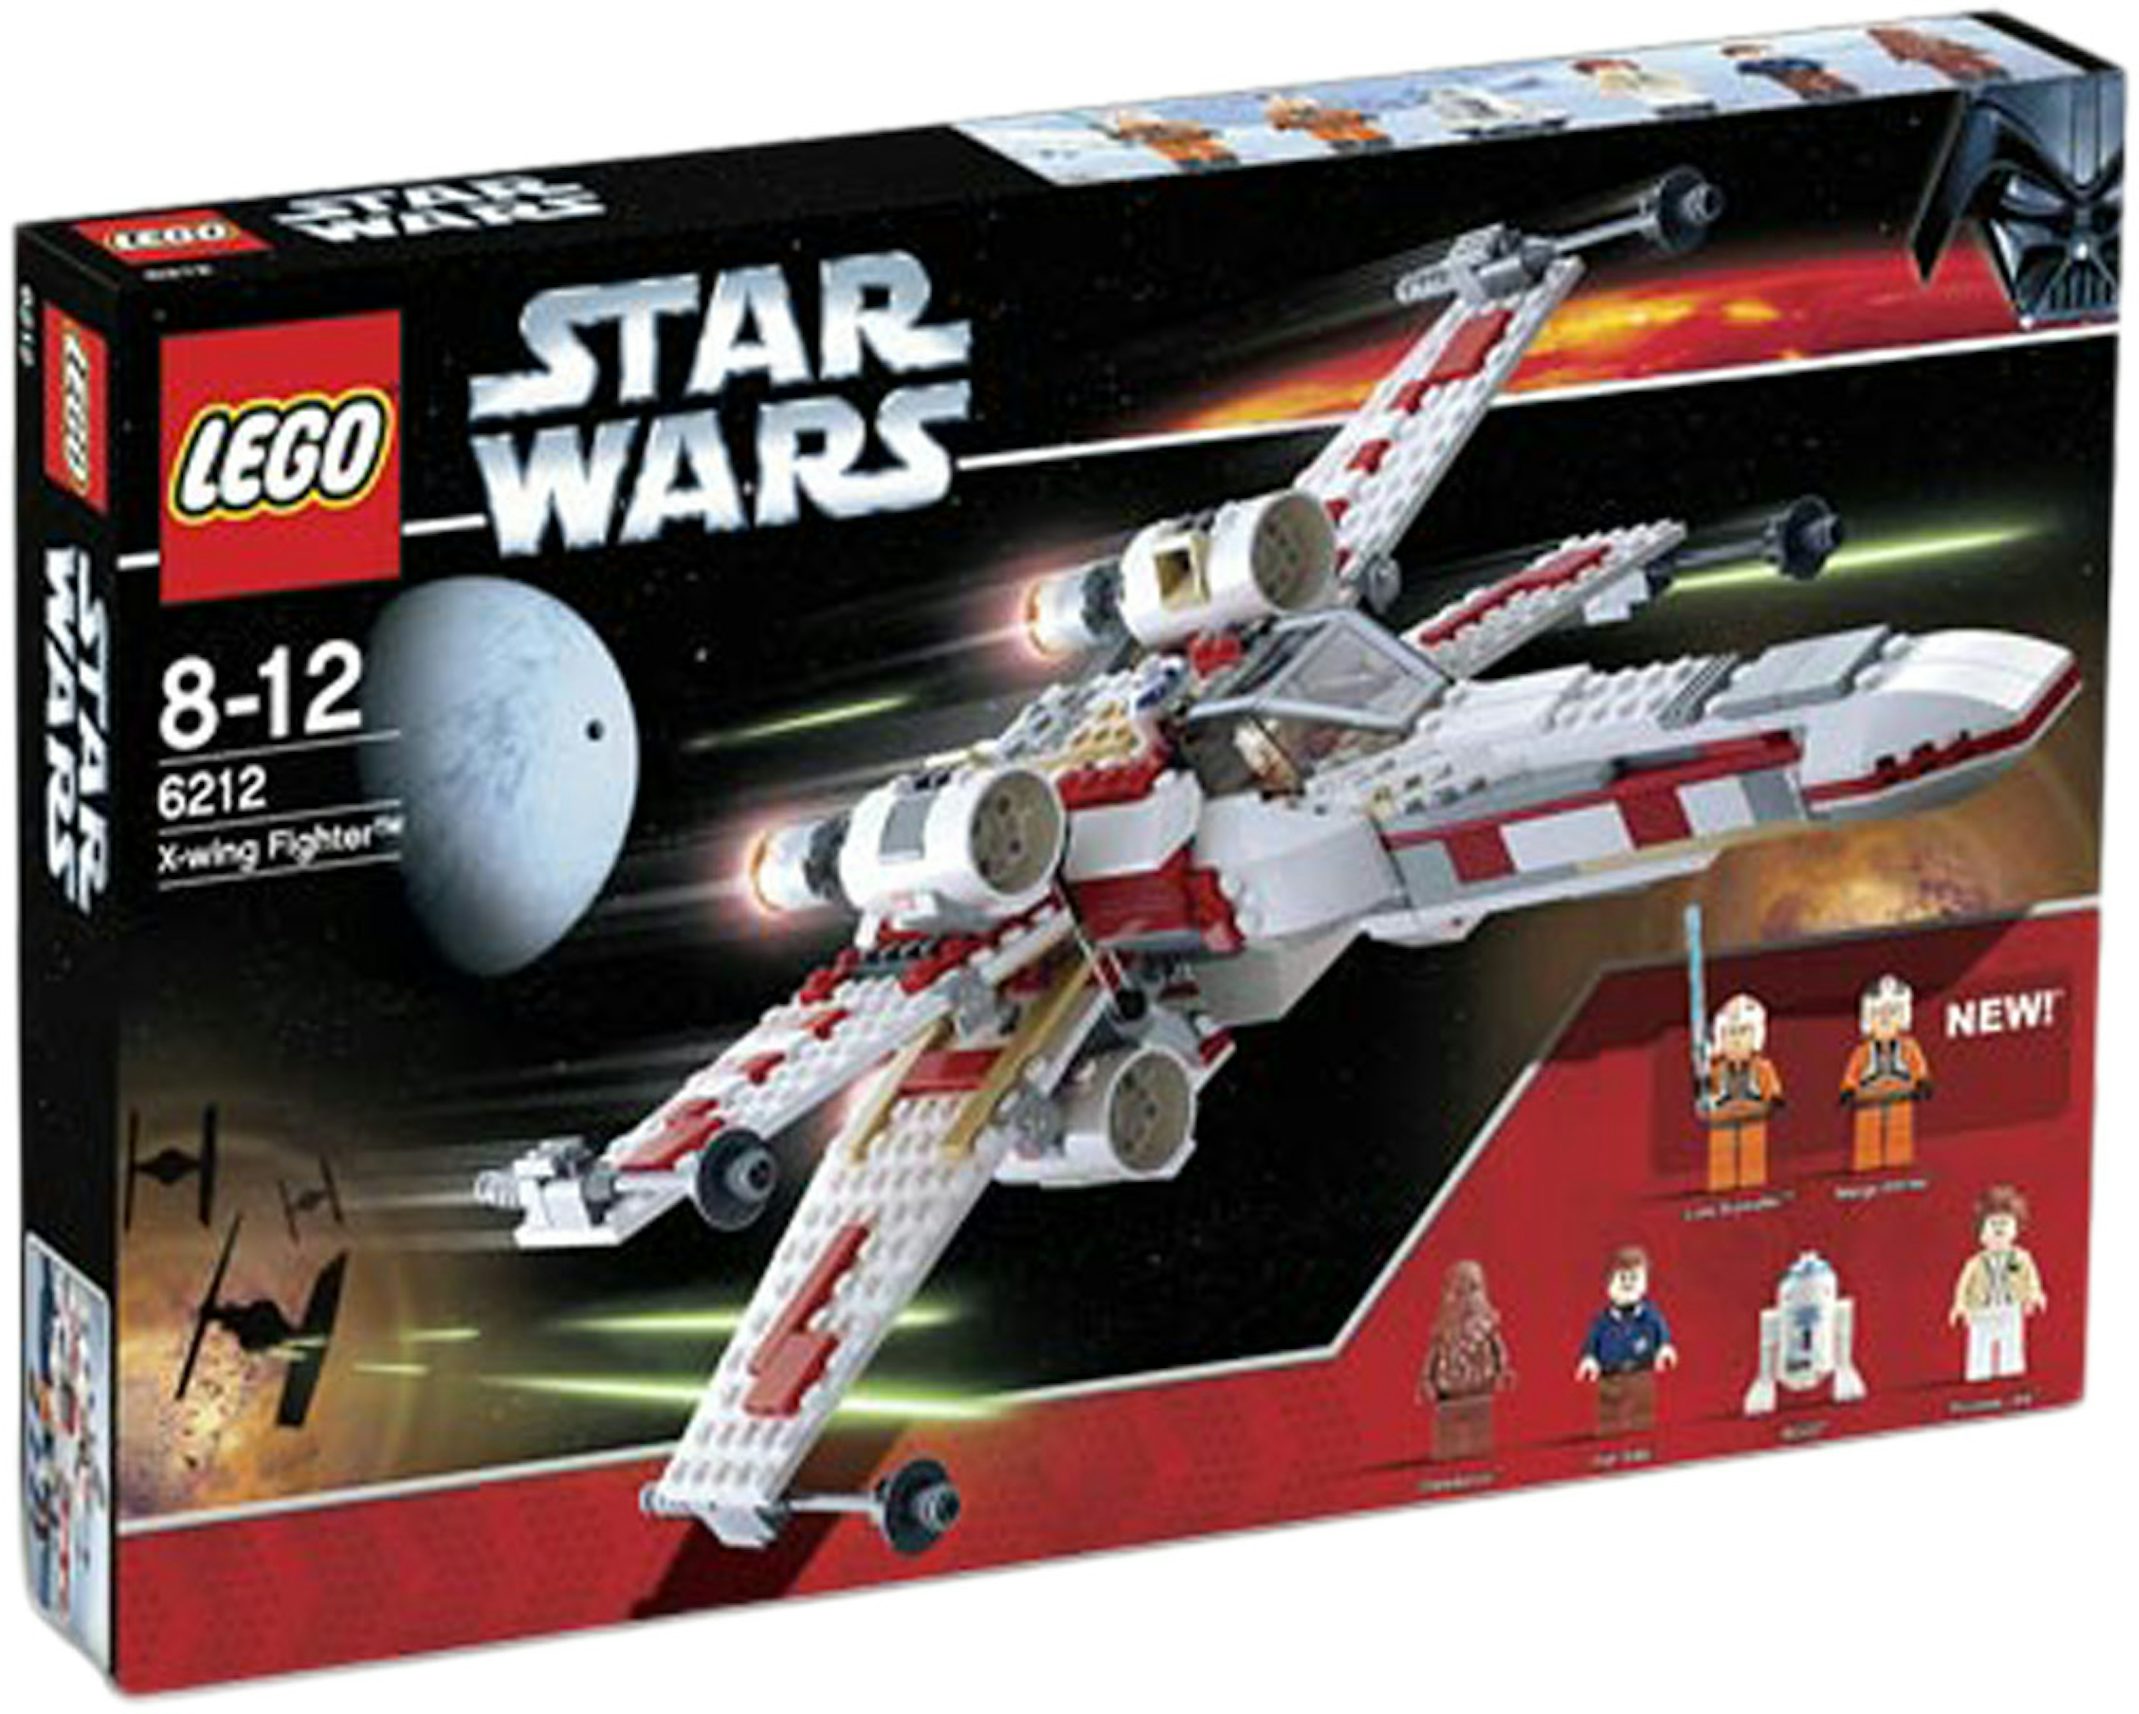 LEGO 6212 Star Wars X-Wing Fighter 100% Complete 6 Figures